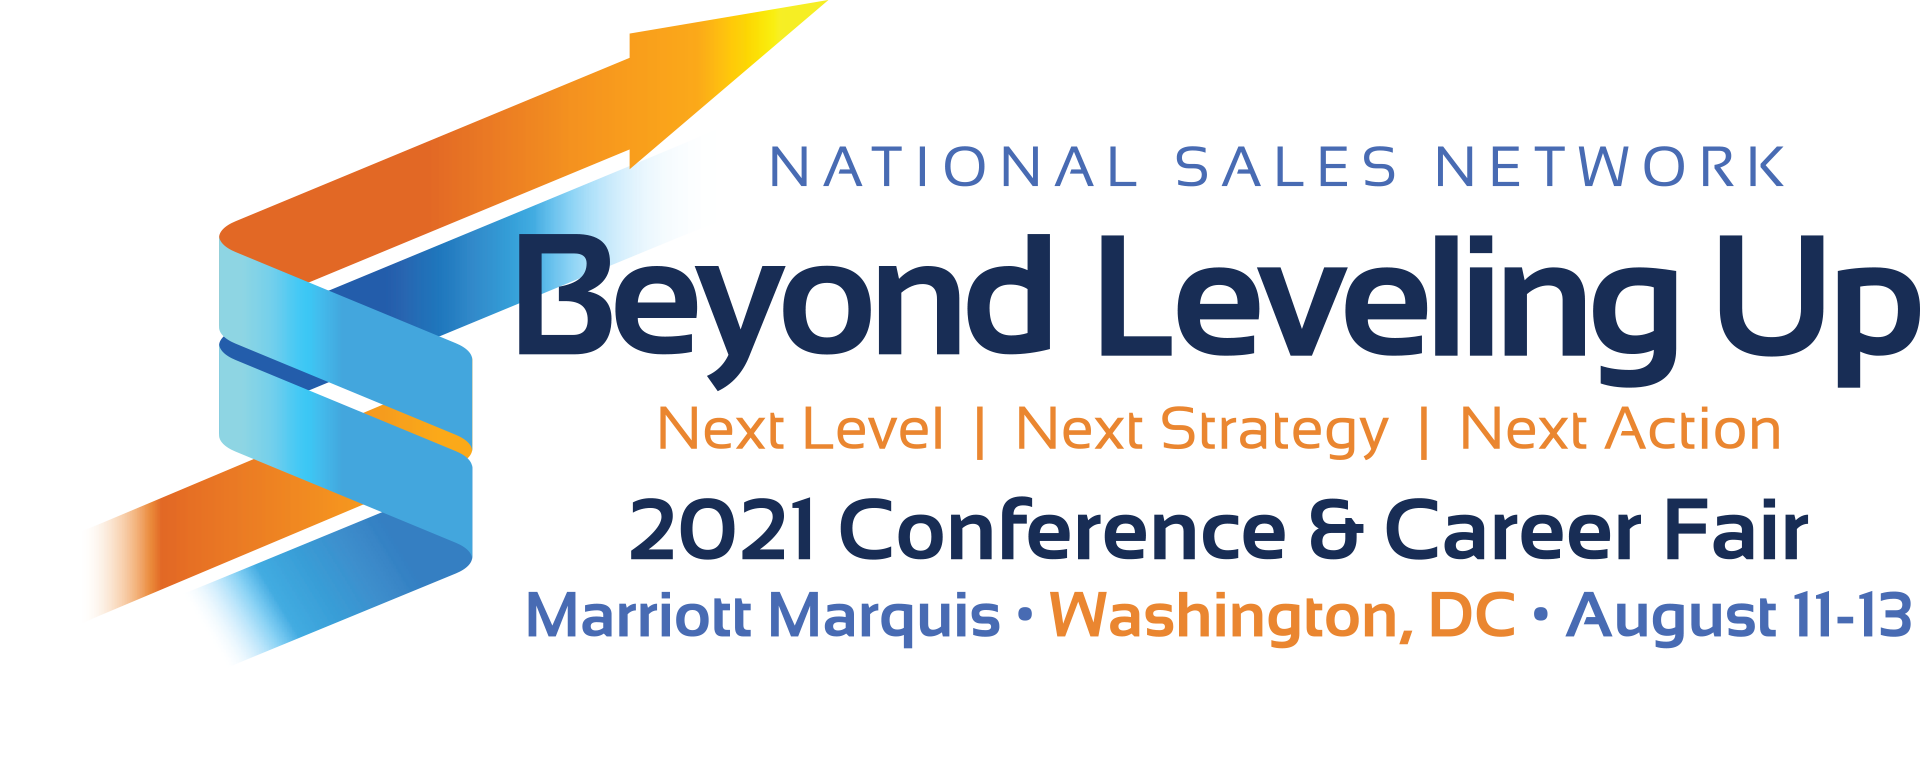 2021 Conference & Career Fair National Sales Network